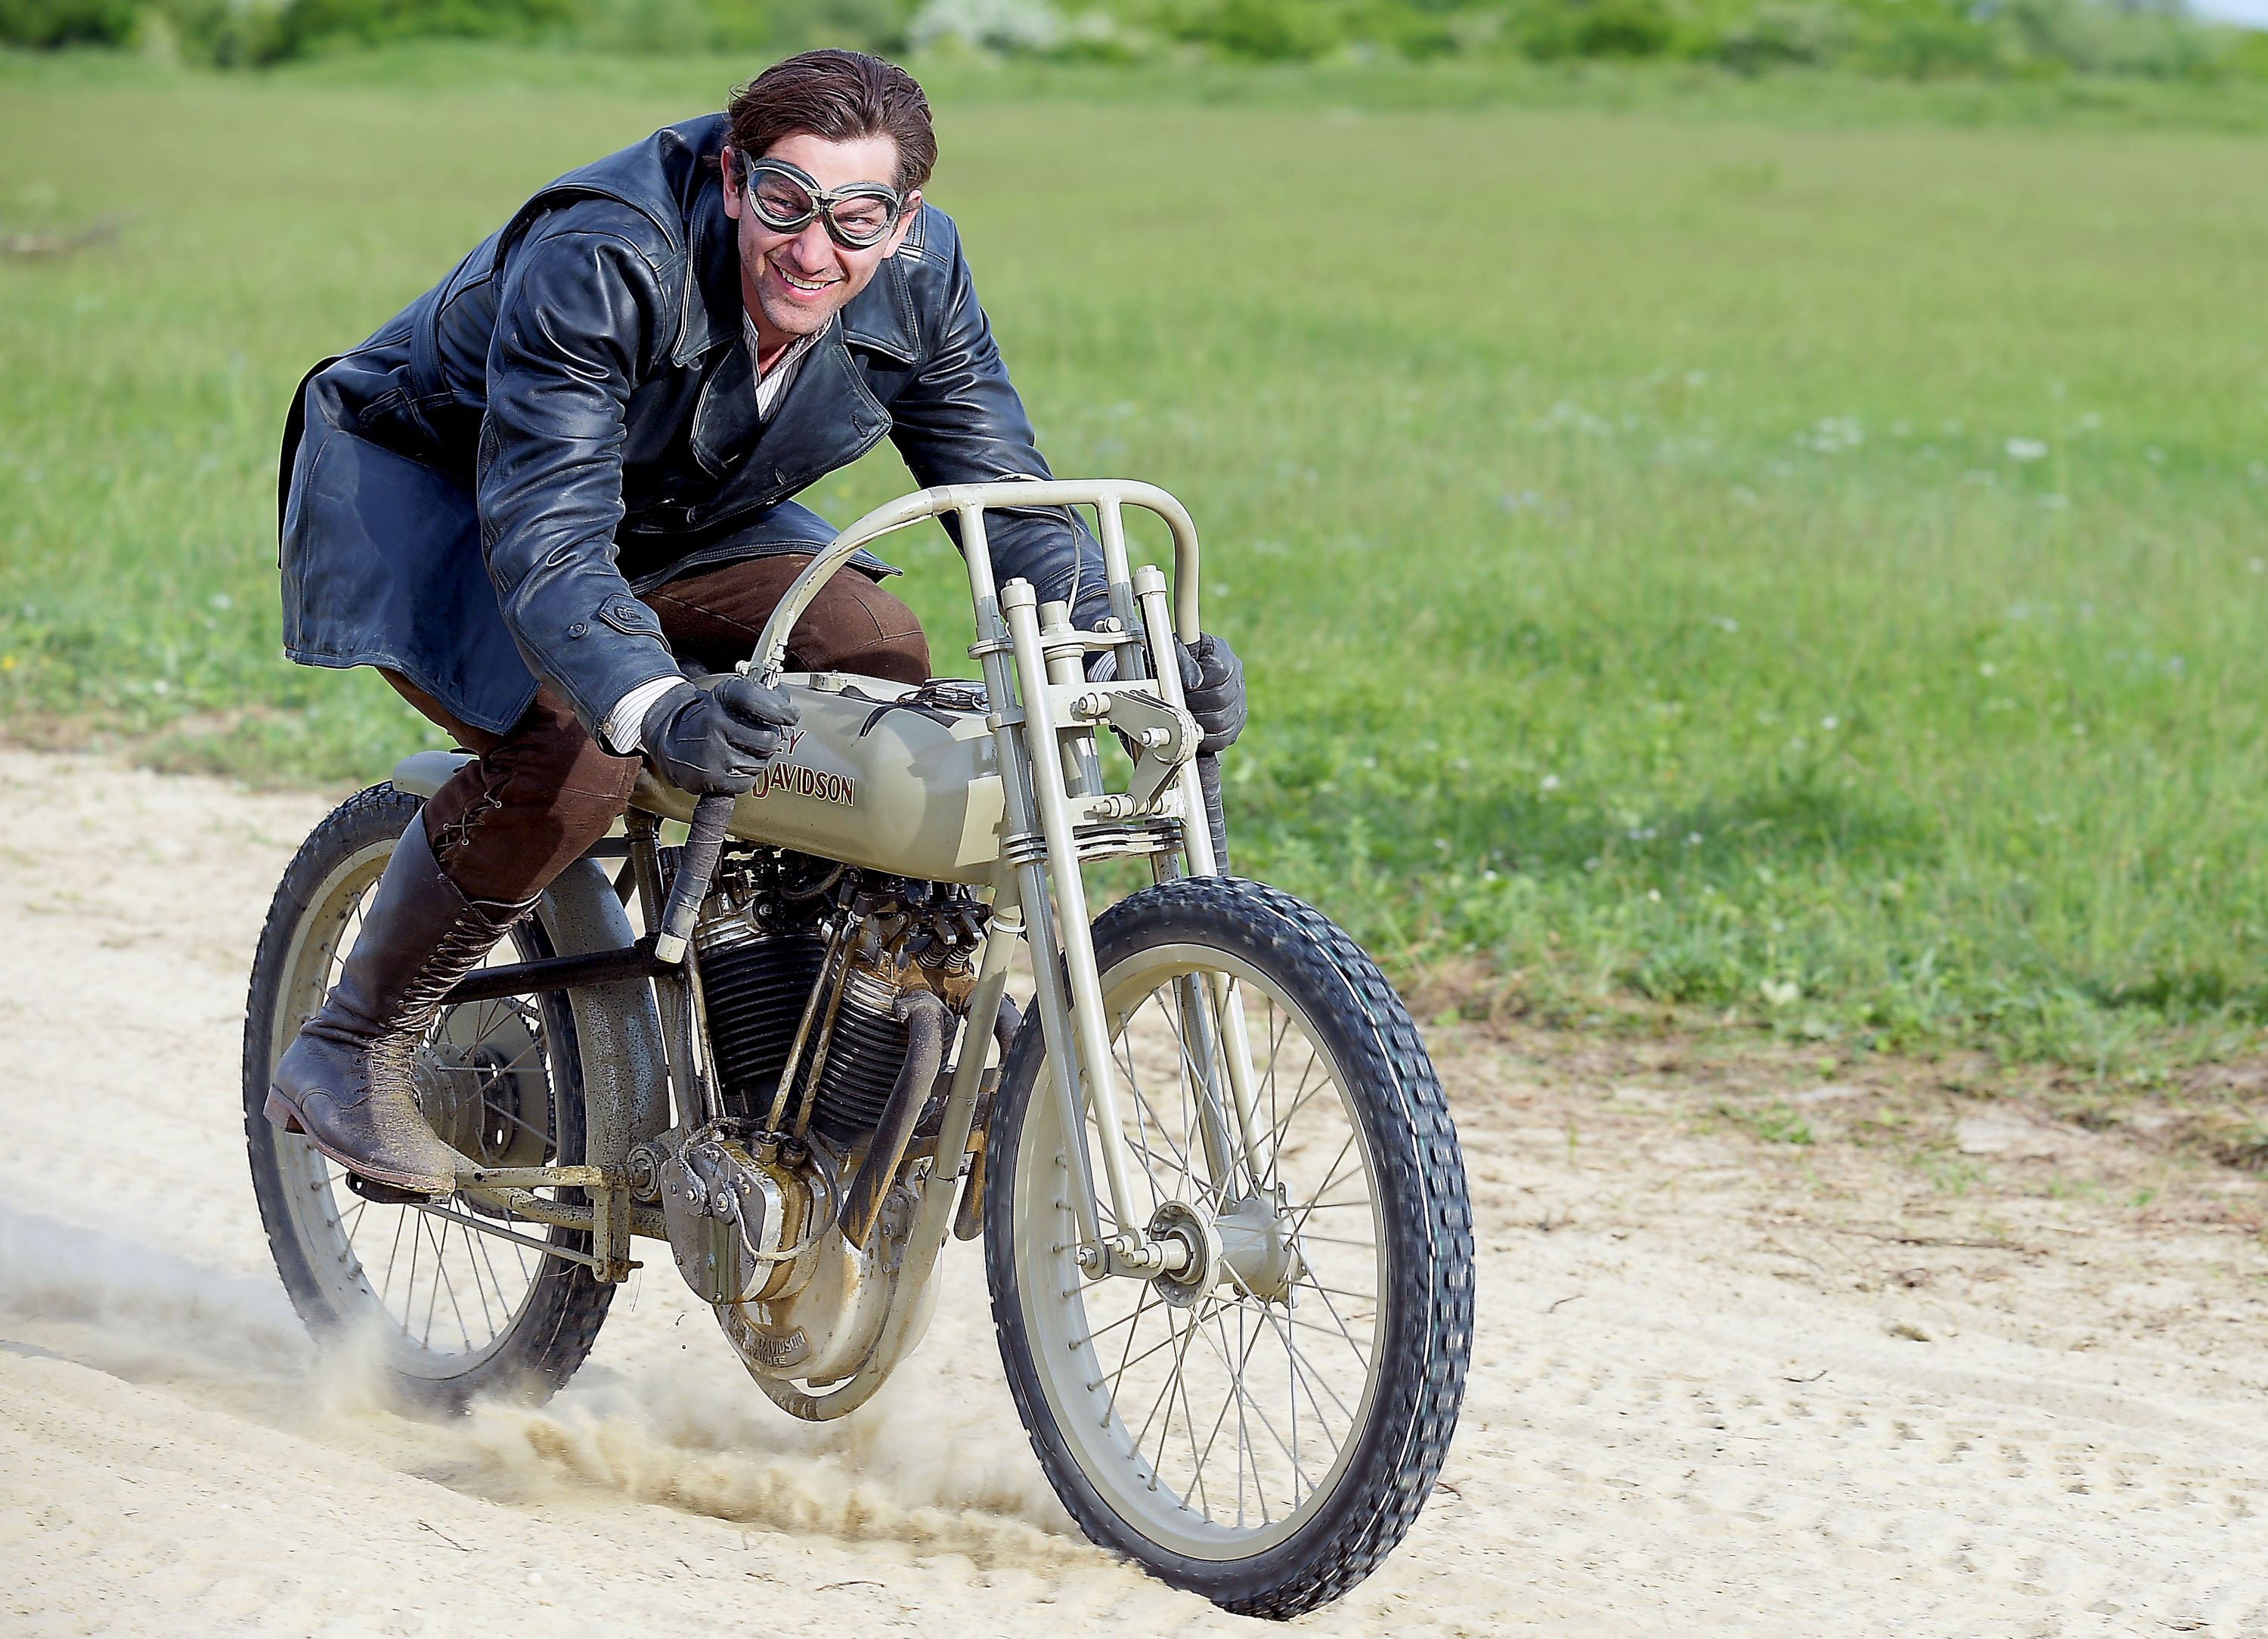 TV Review: Harley And The Davidsons, starring Michiel Huisman